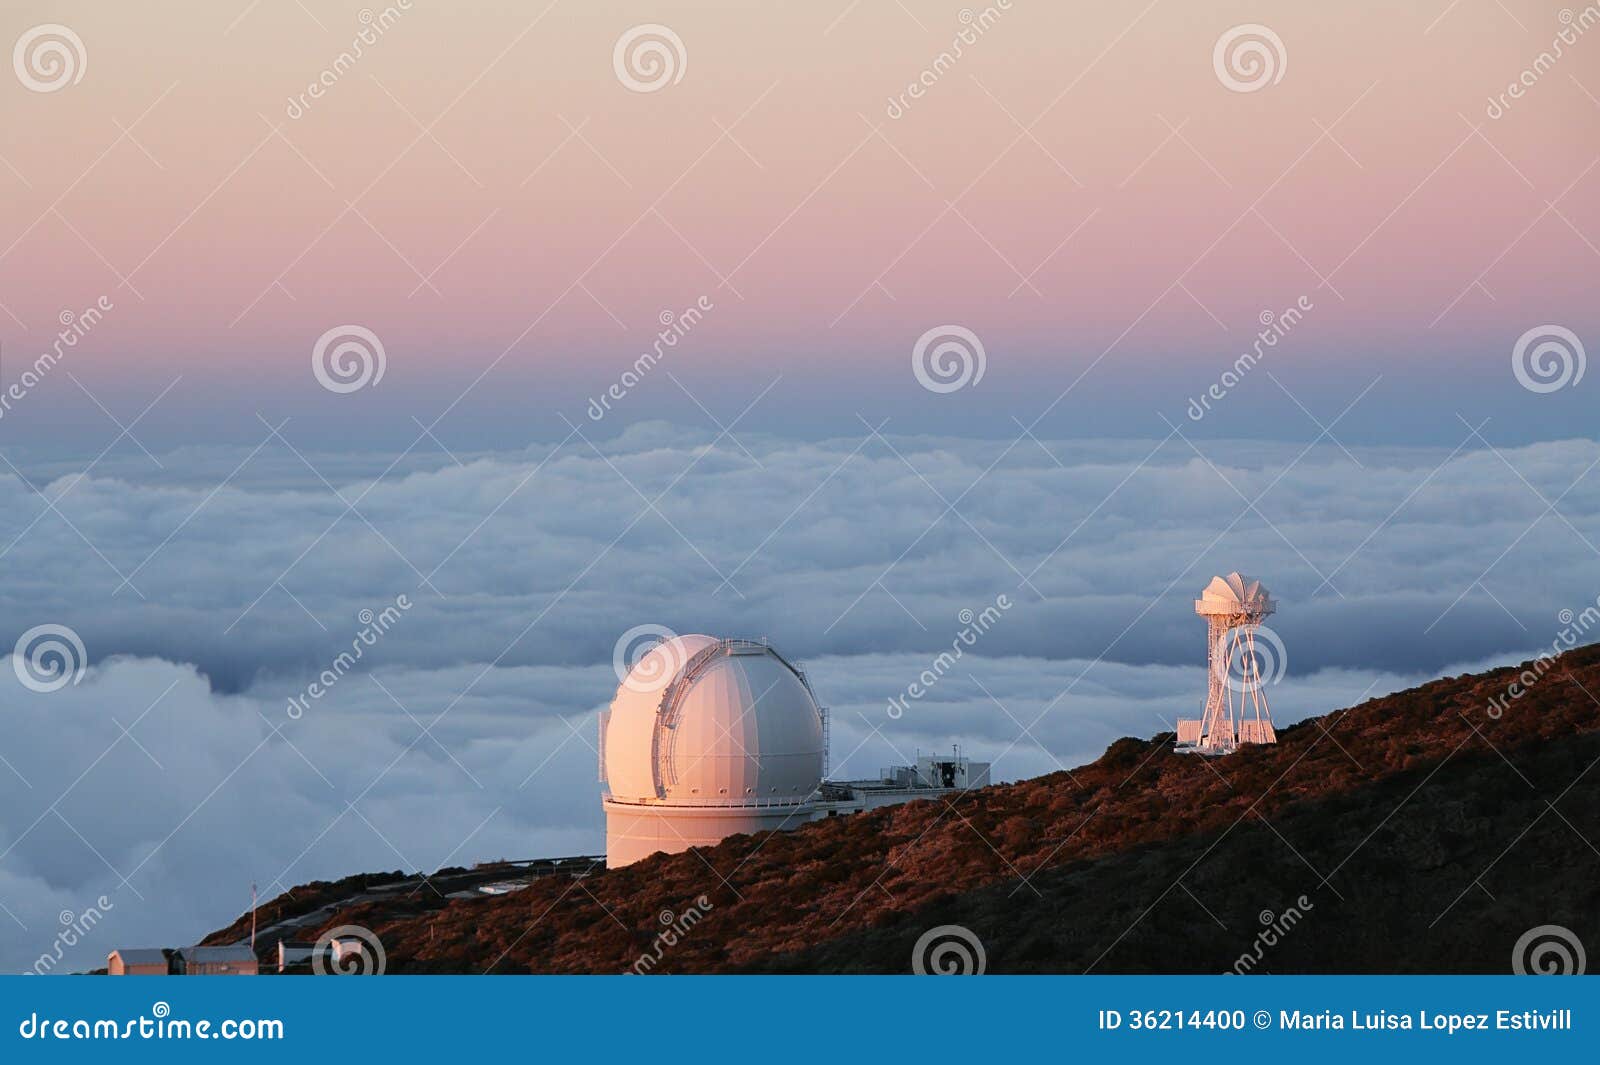 the largest astronomical observatory located in la palma island